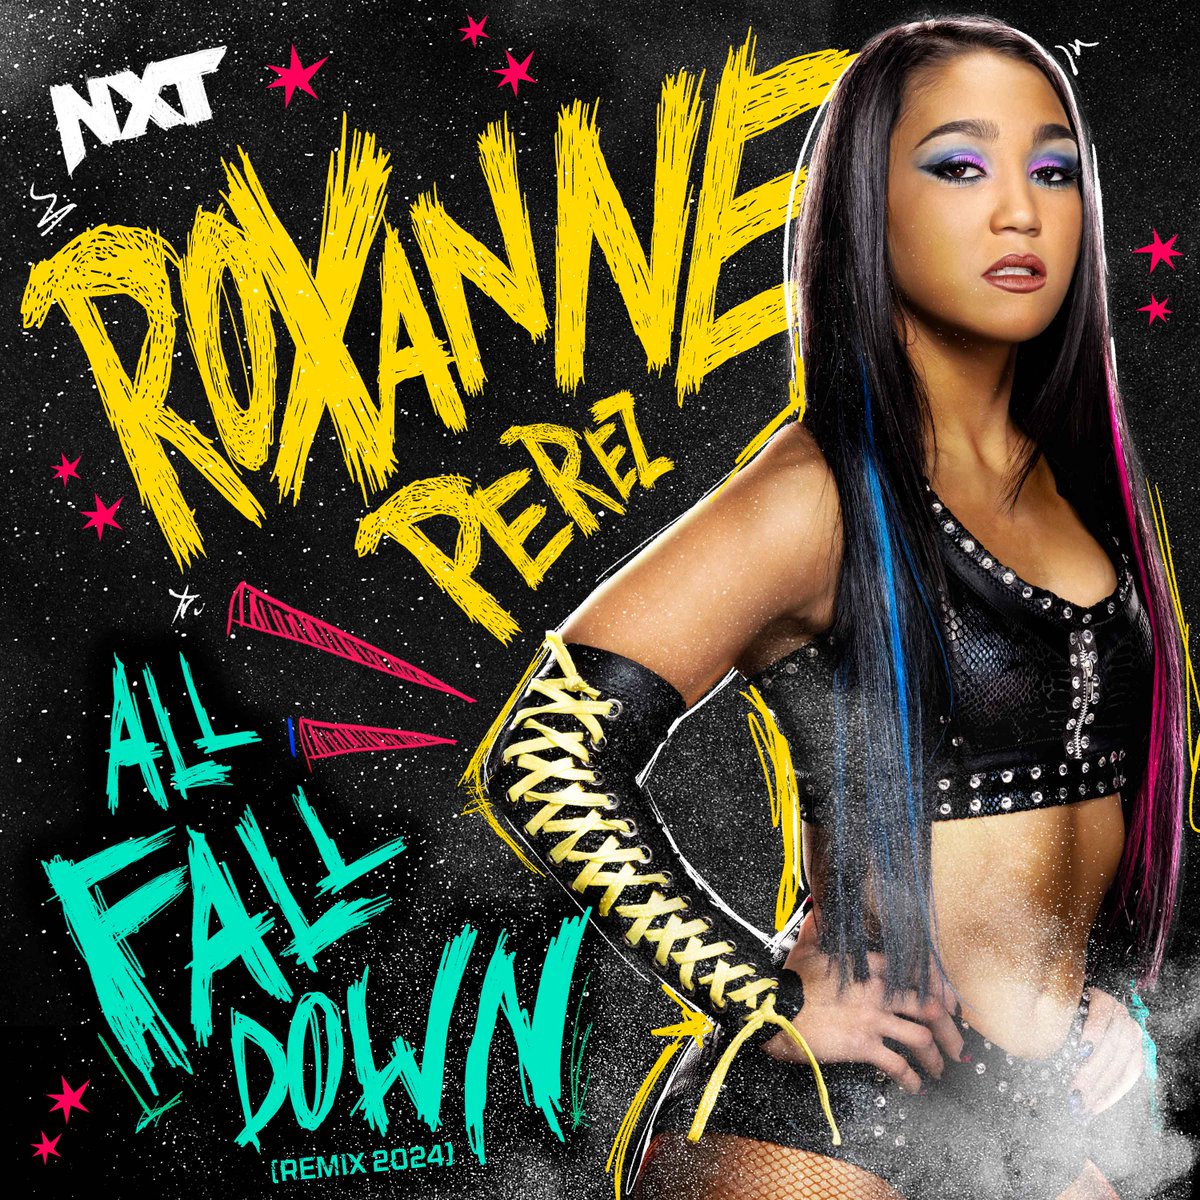 The Prodigy makes her mark. Listen to @roxanne_wwe’s theme “All Fall Down (Remix 2024)” on your favorite music service: linktr.ee/wwemusic